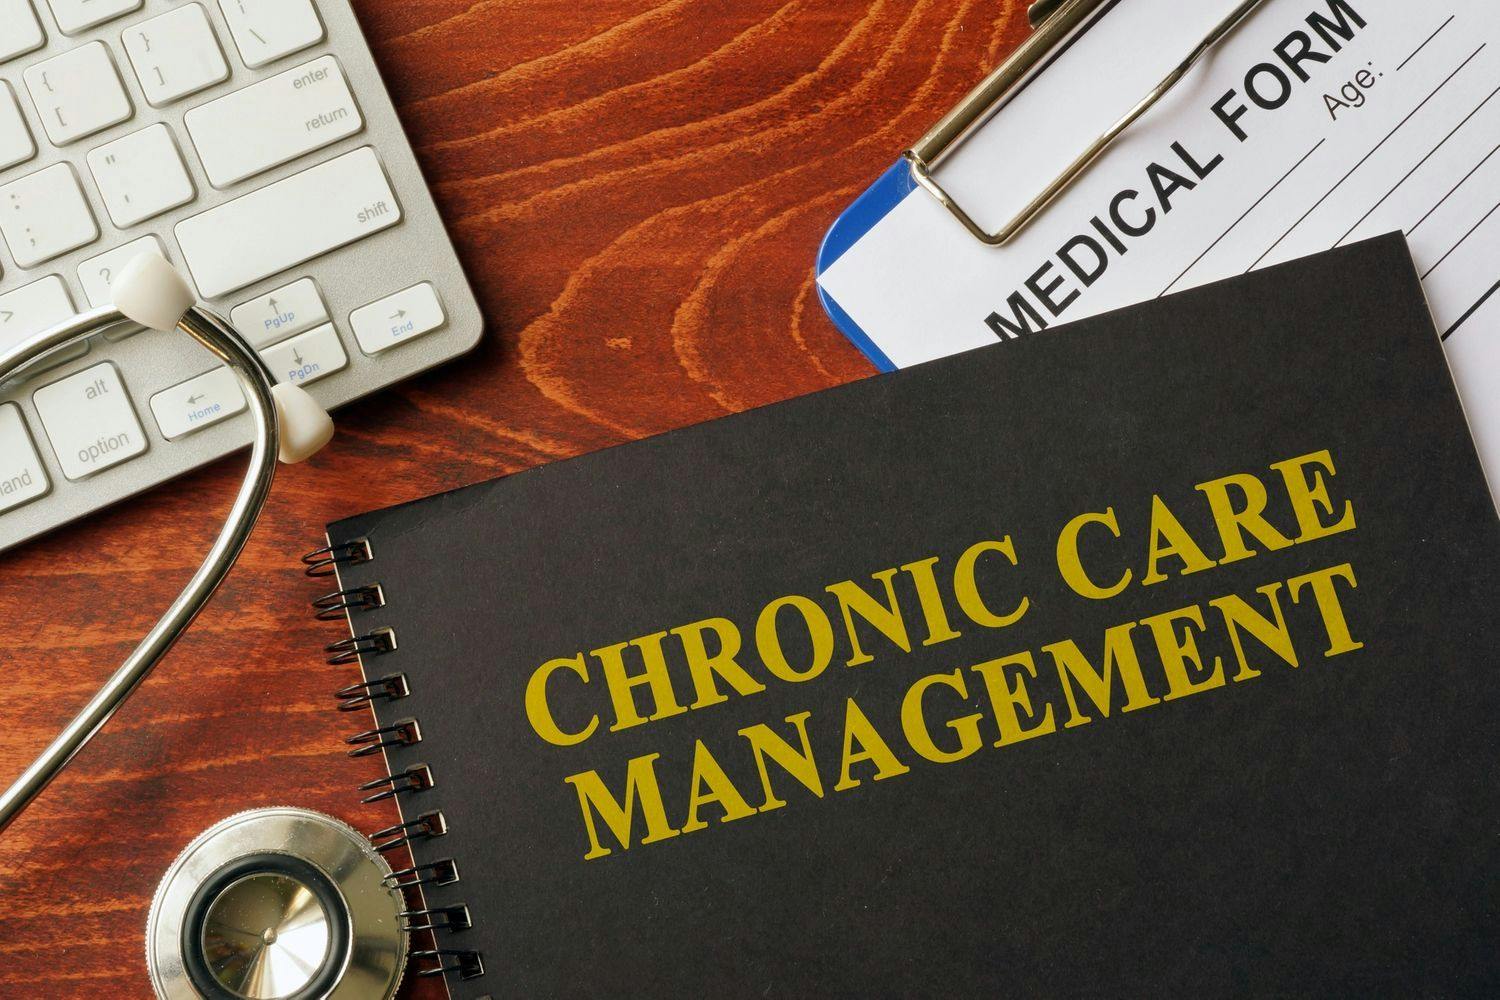 Care management processes for chronic diseases have held up well during pandemic